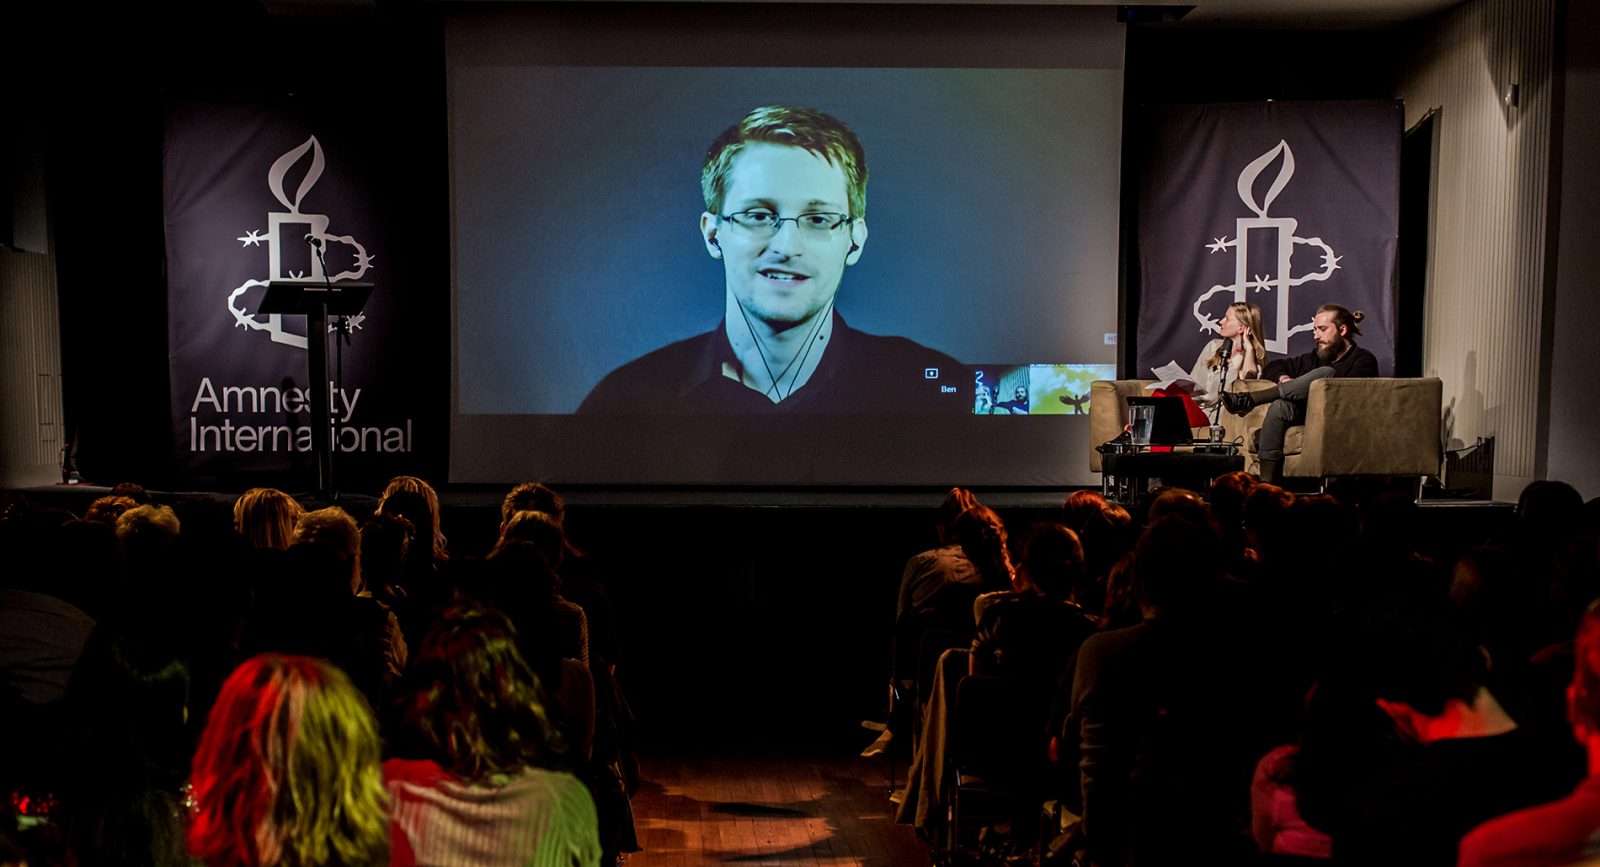 Edward Snowden appearing via video link at an Amnesty International event